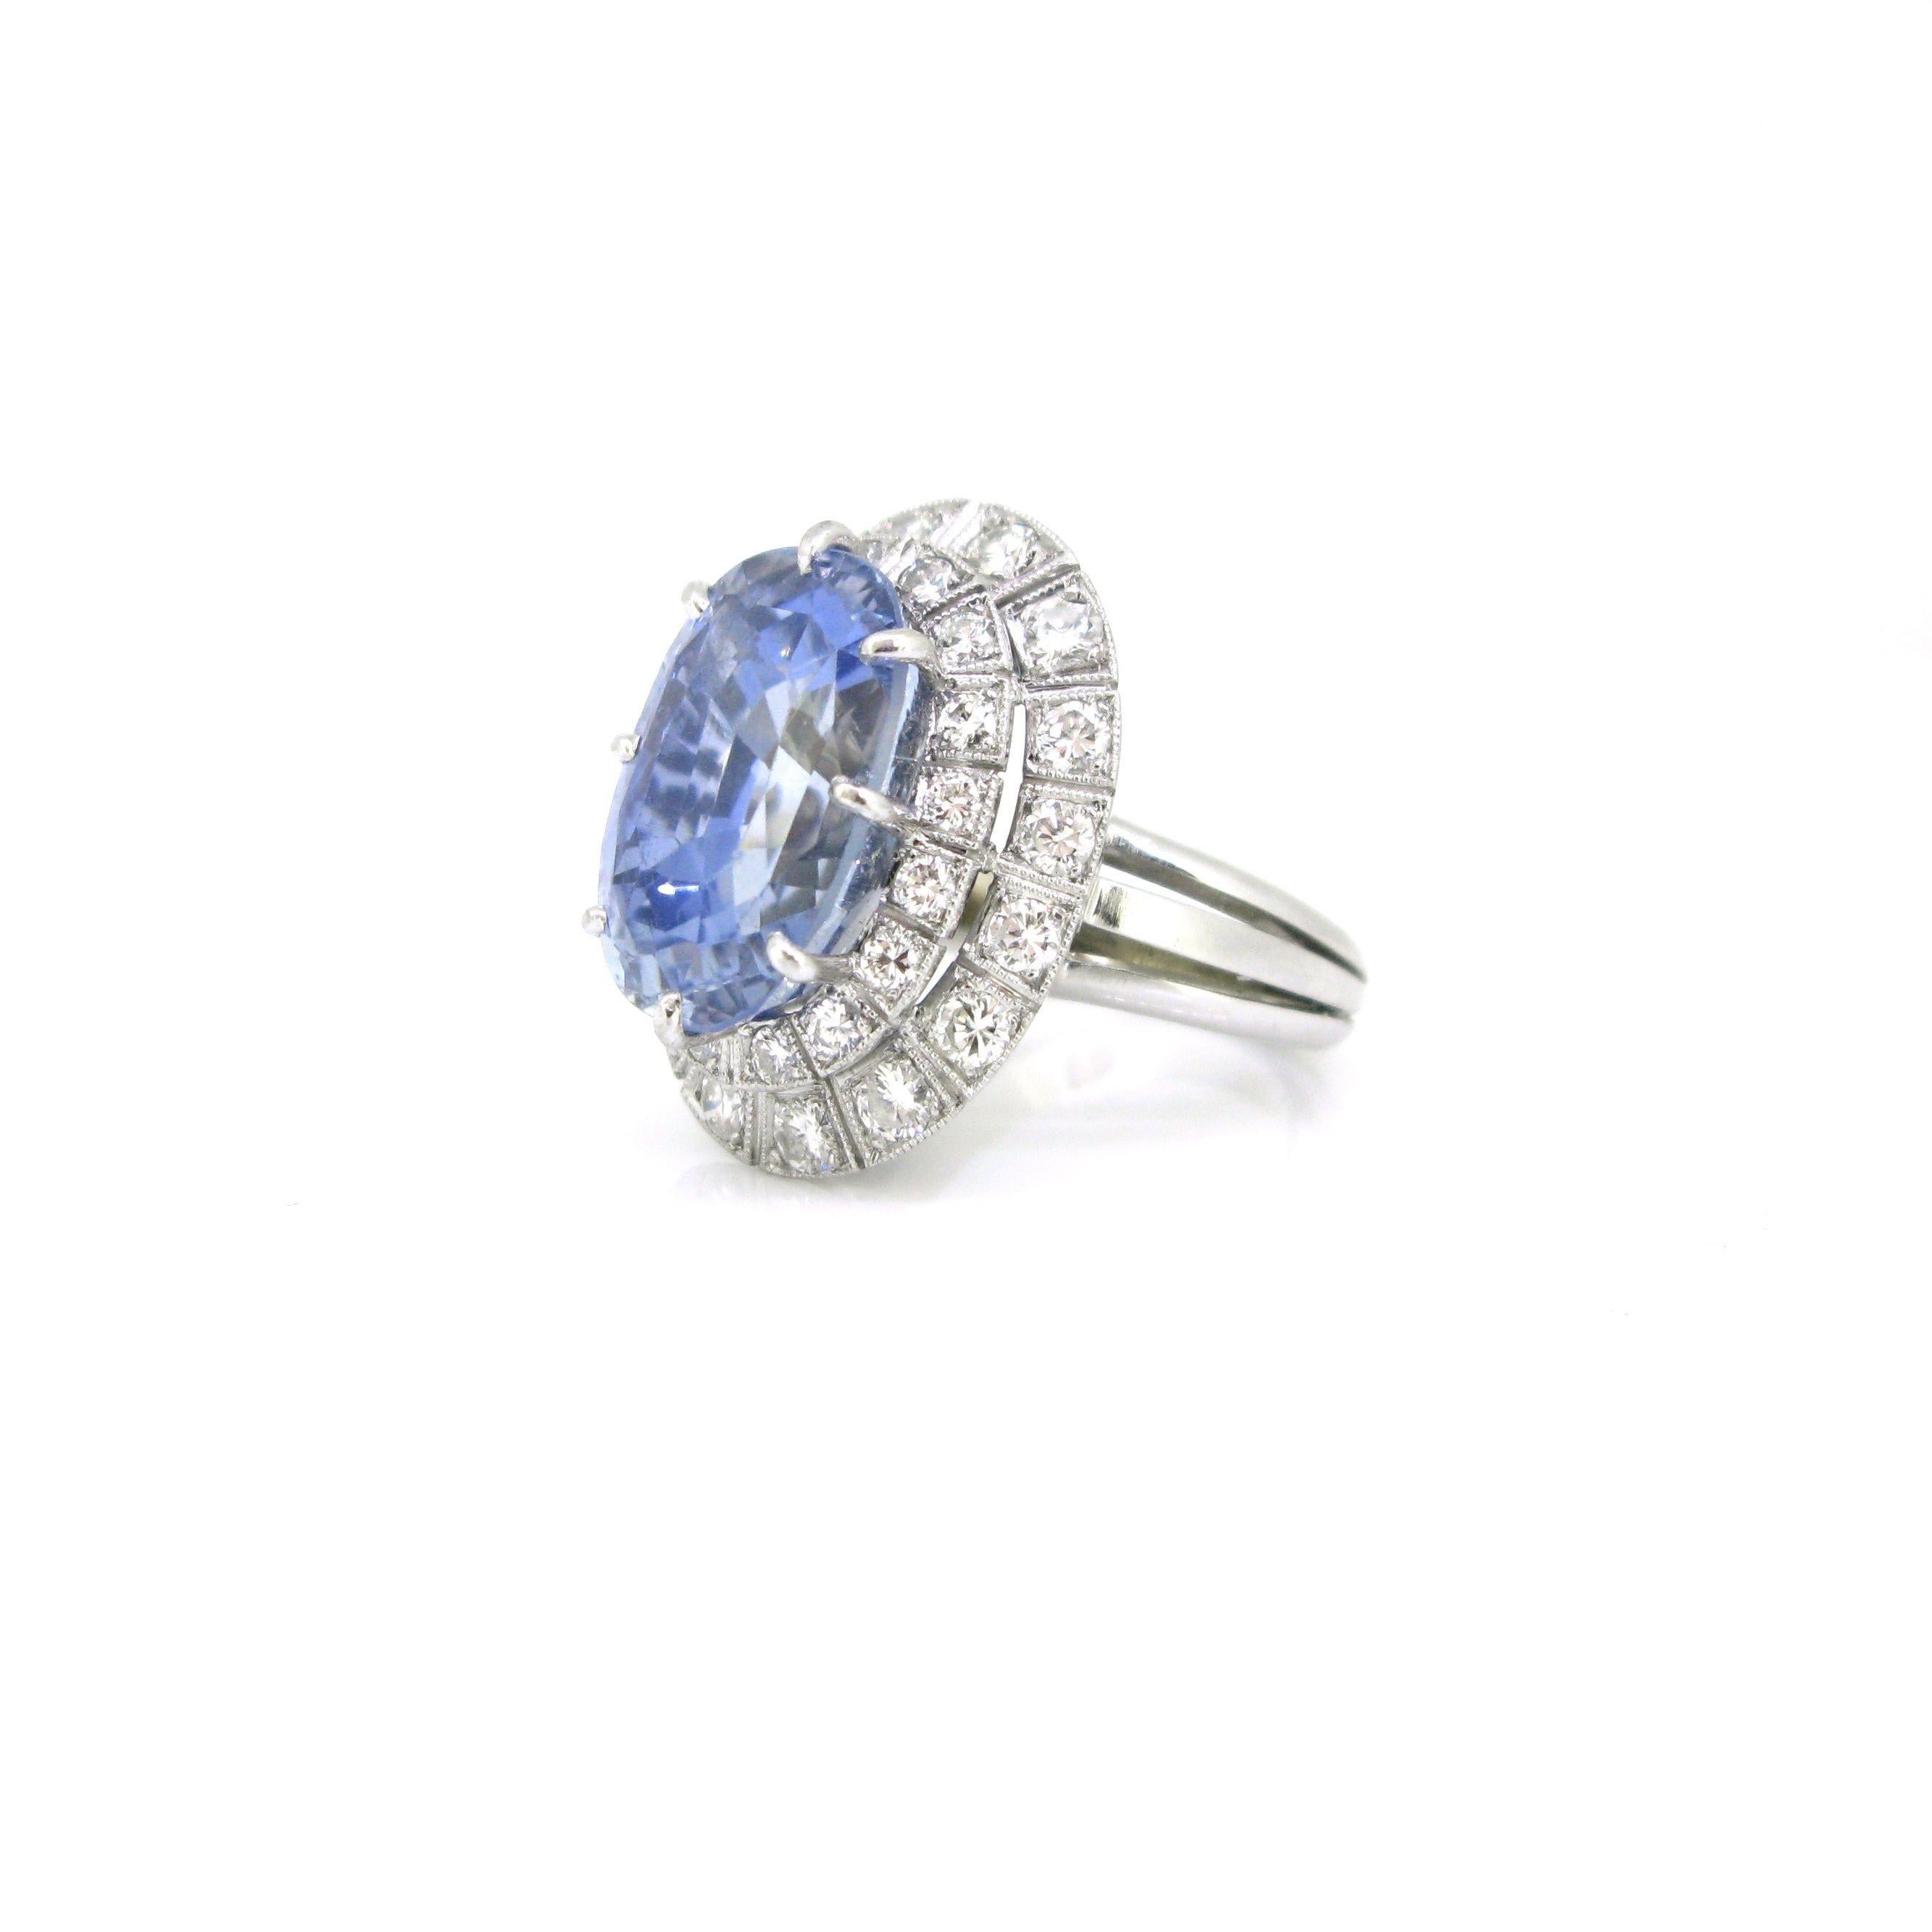 20ct Ceylon Natural Sapphire Diamonds Cluster Ring, Platinum, France, circa 1940 In Good Condition For Sale In London, GB